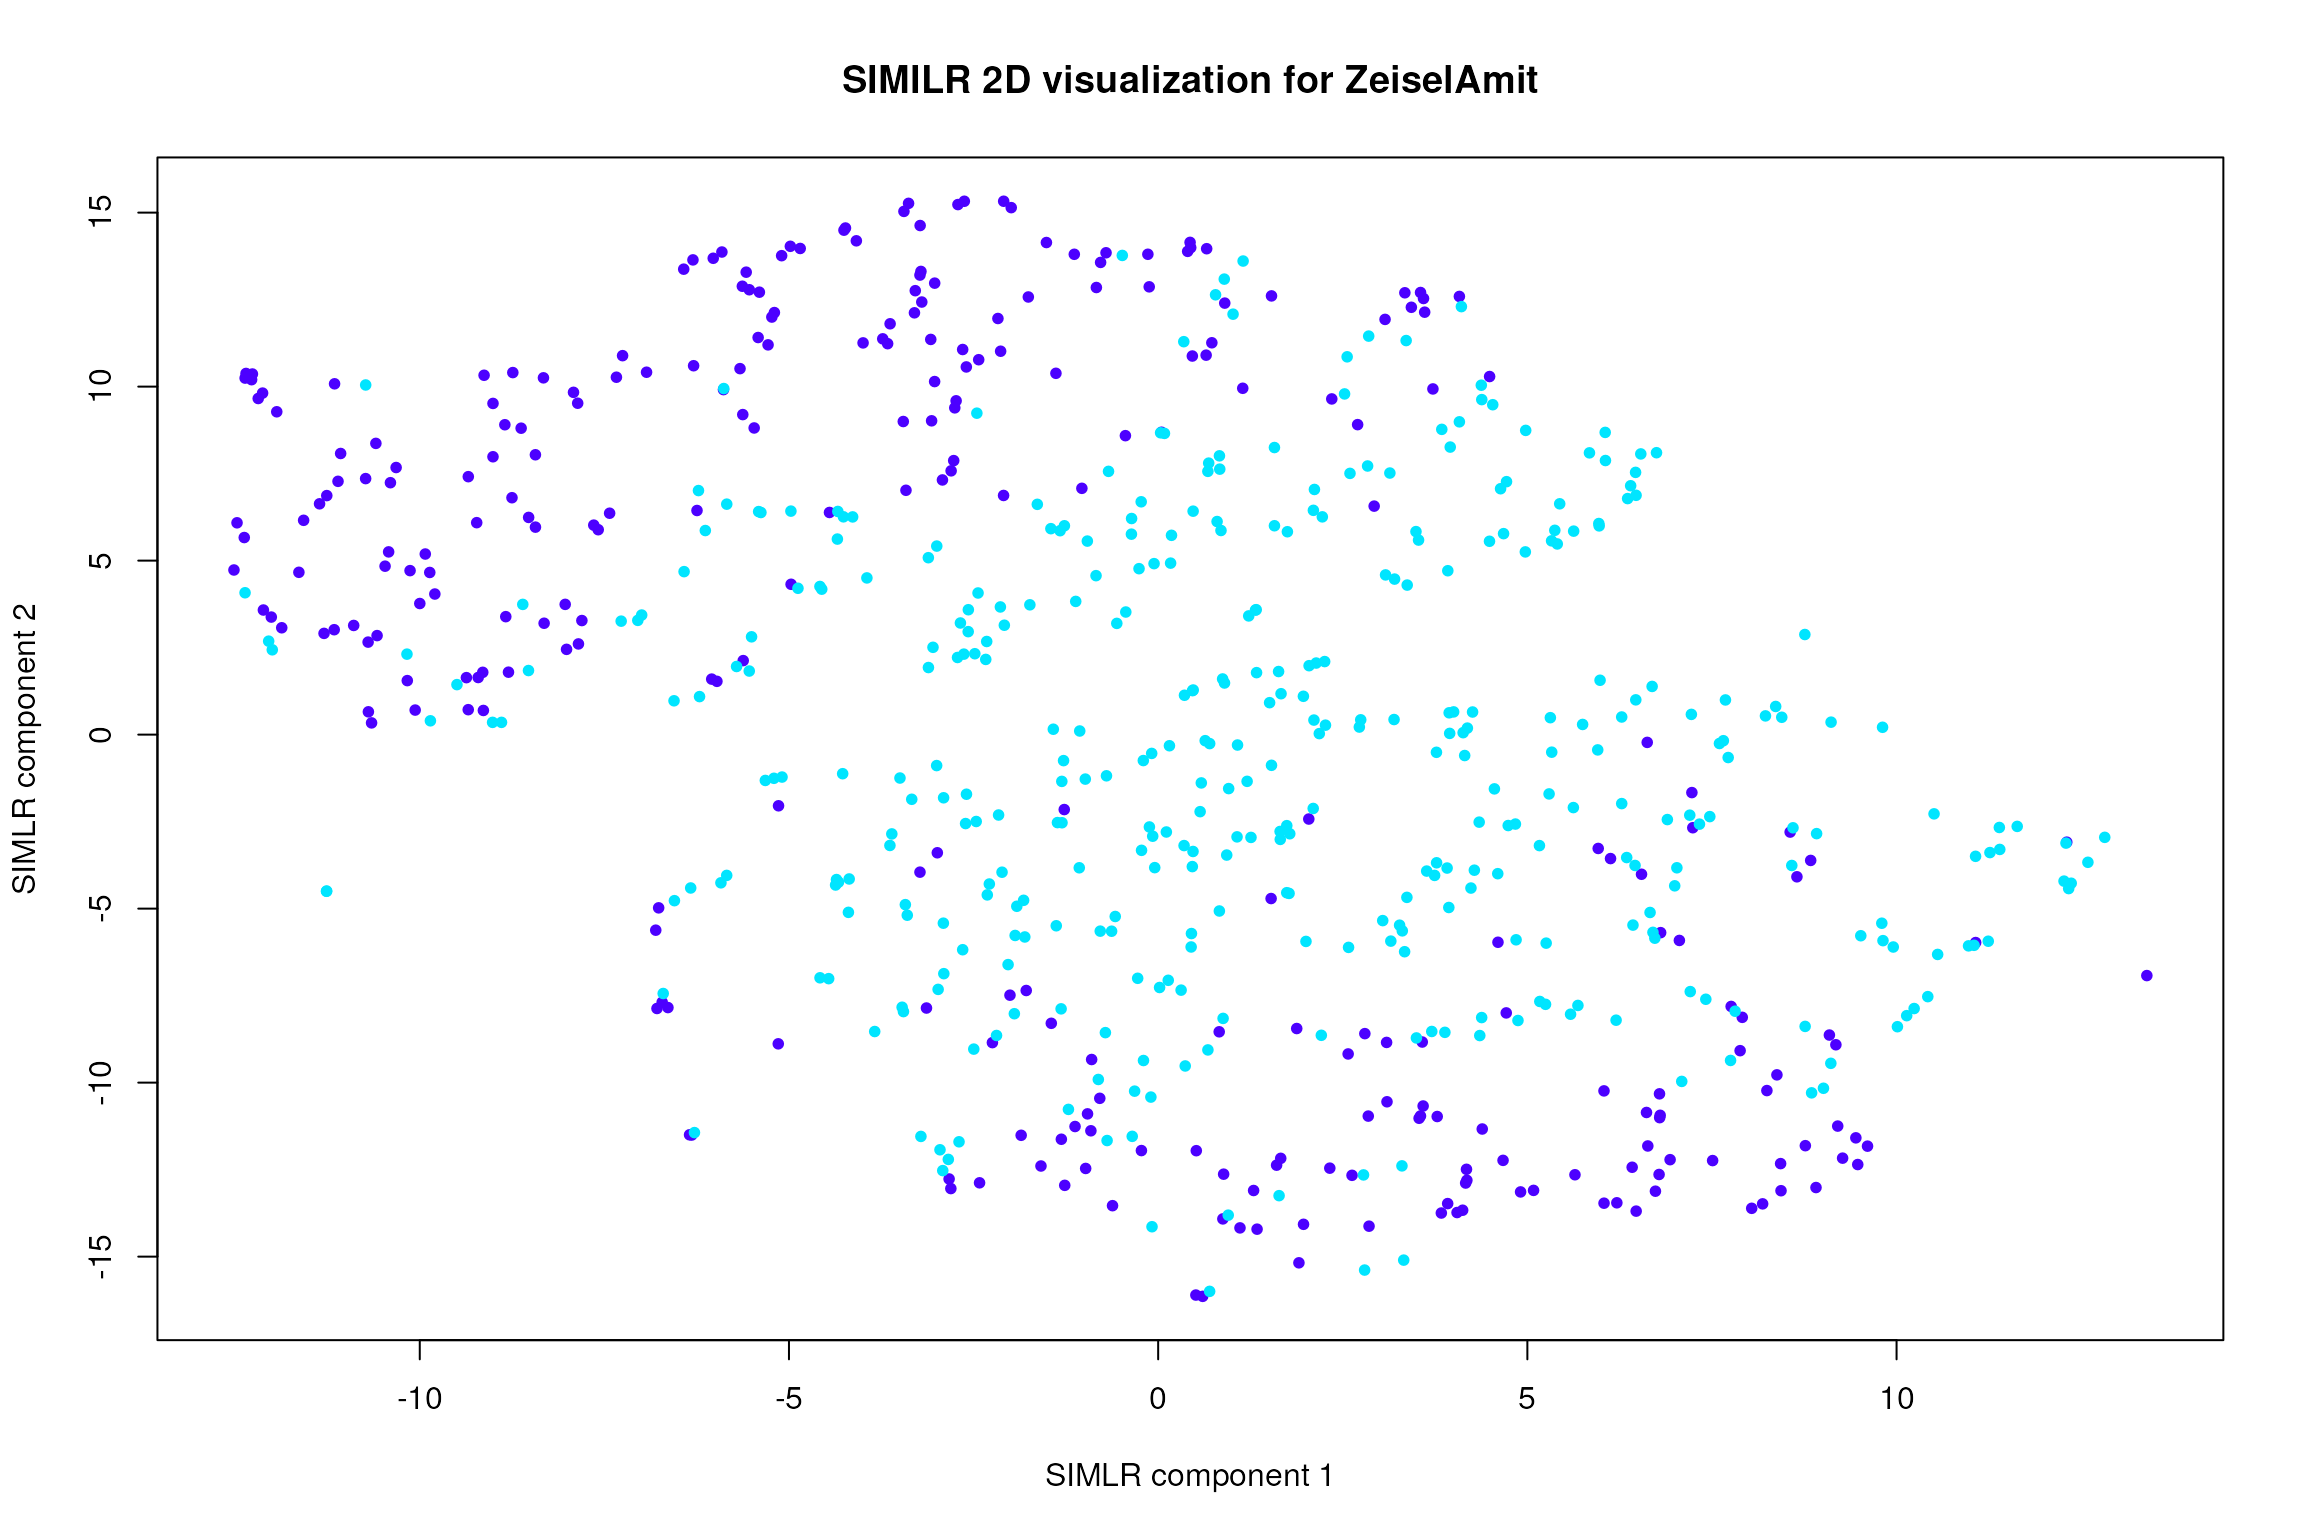 Visualization of the 9 cell populations retrieved by SIMLR large scale on the dataset by Zeisel, Amit, et al.